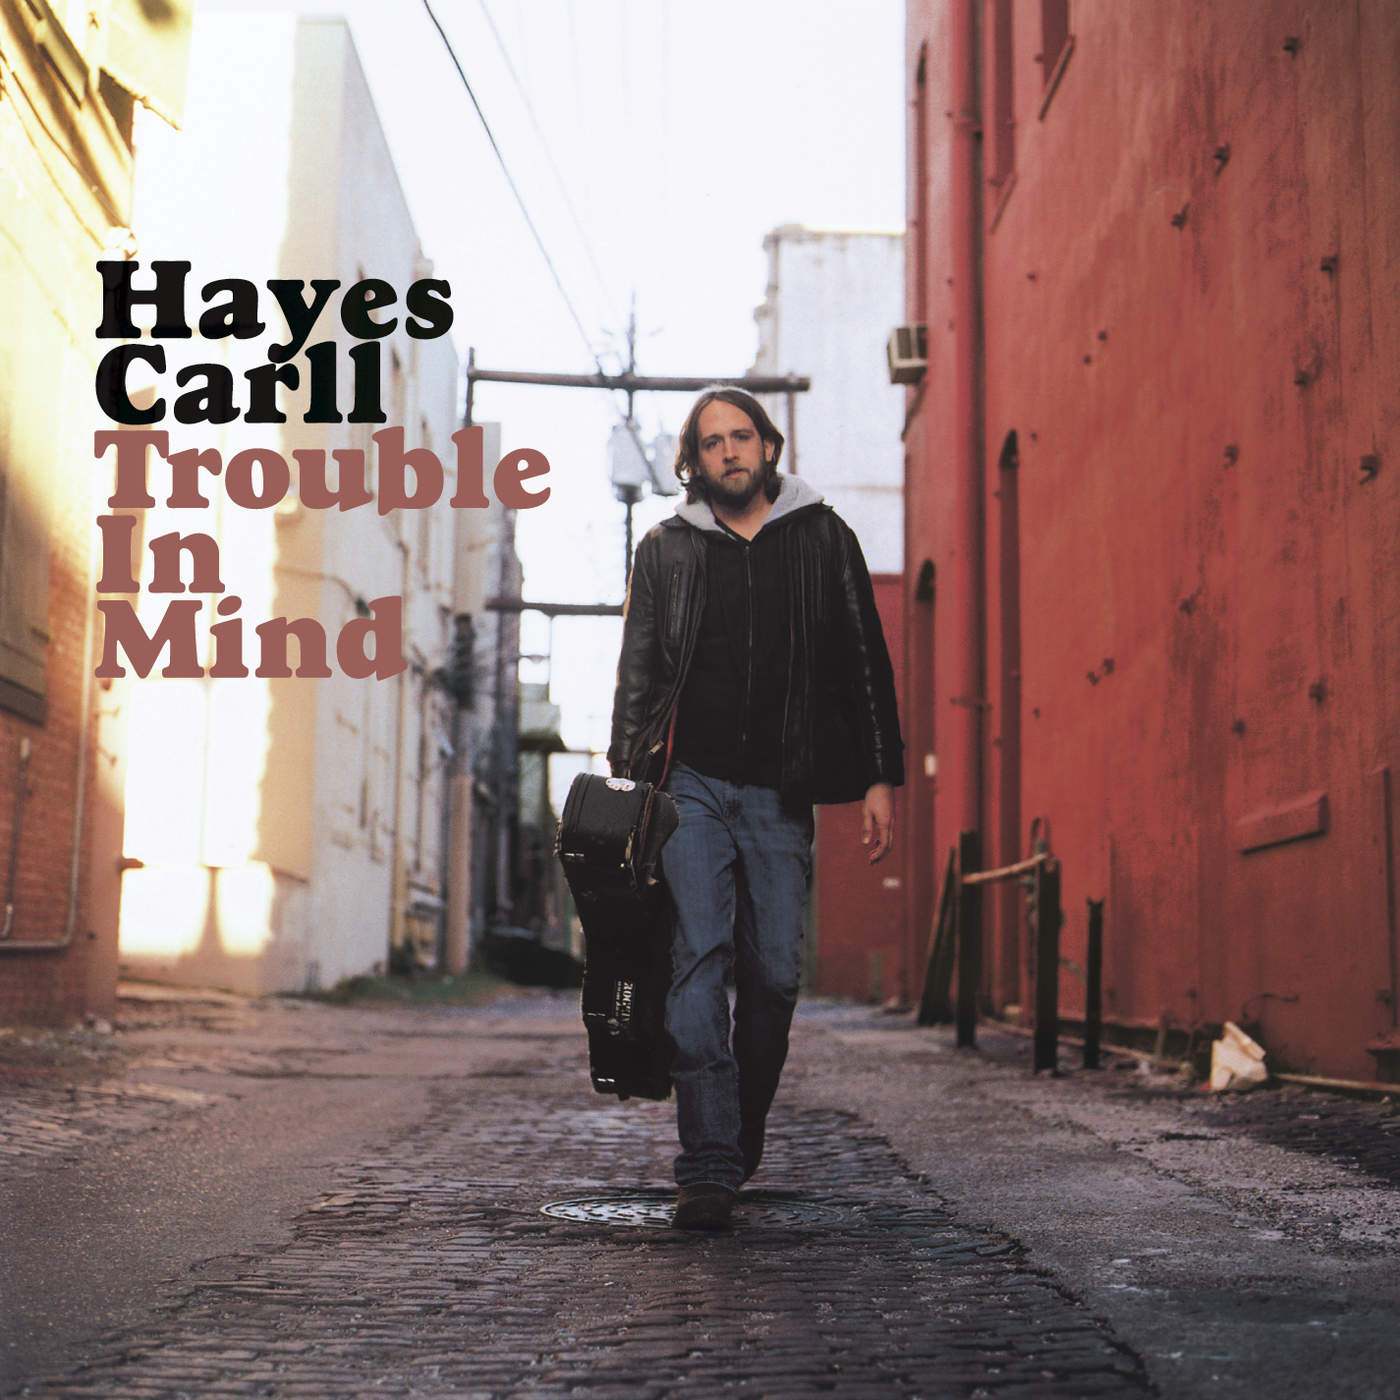 Art for I Got a Gig by Hayes Carll